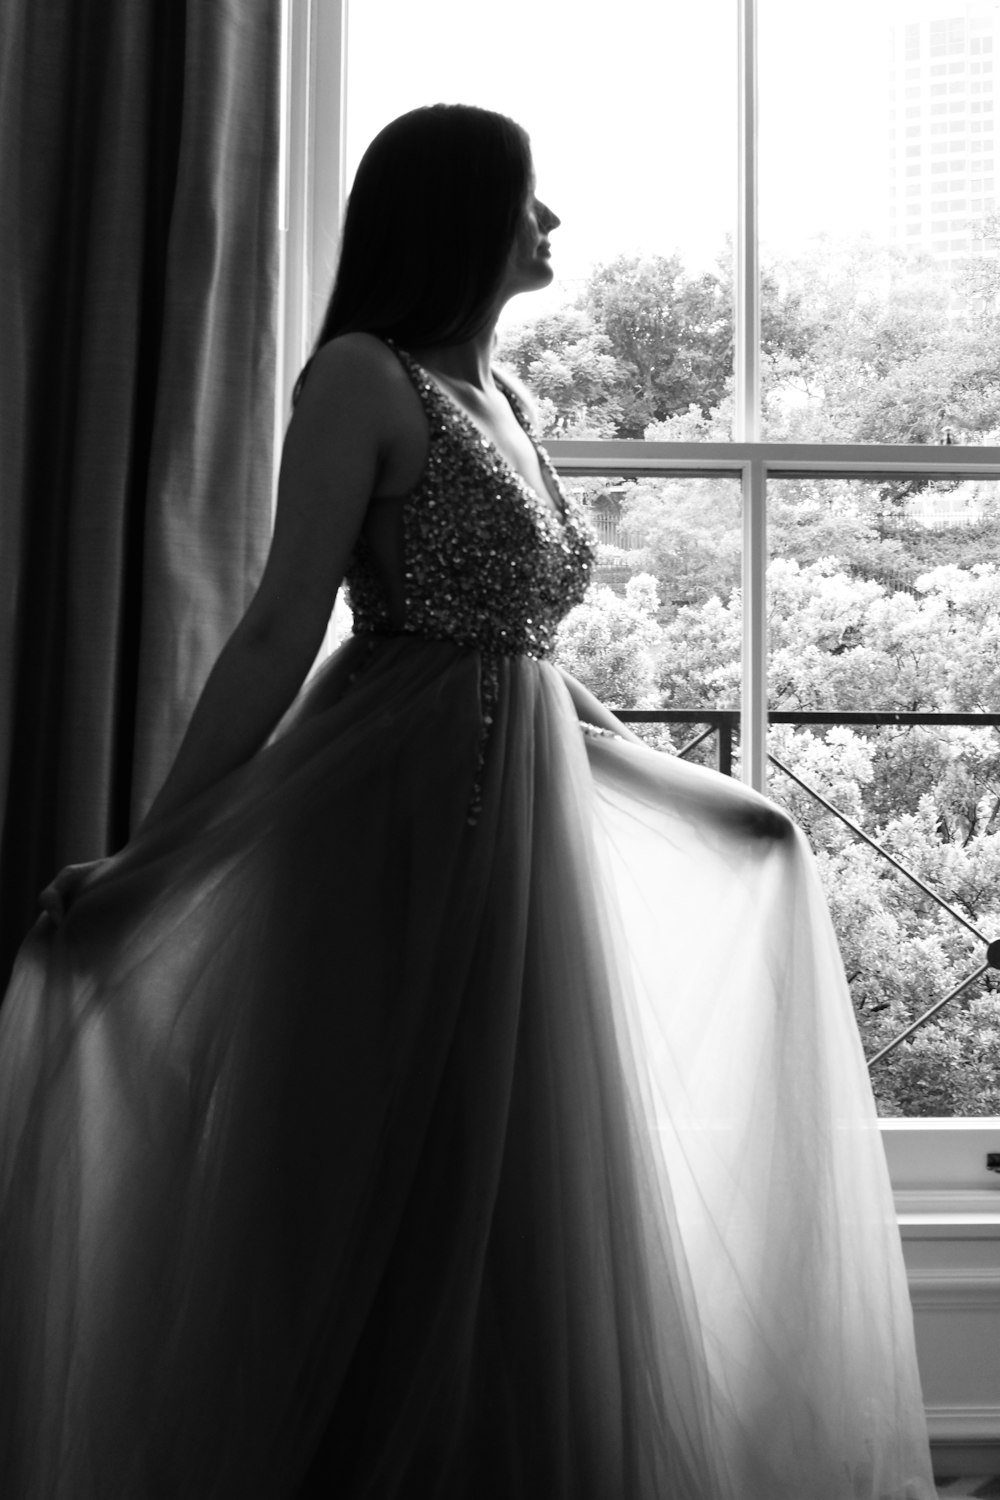 a woman in a dress looking out a window